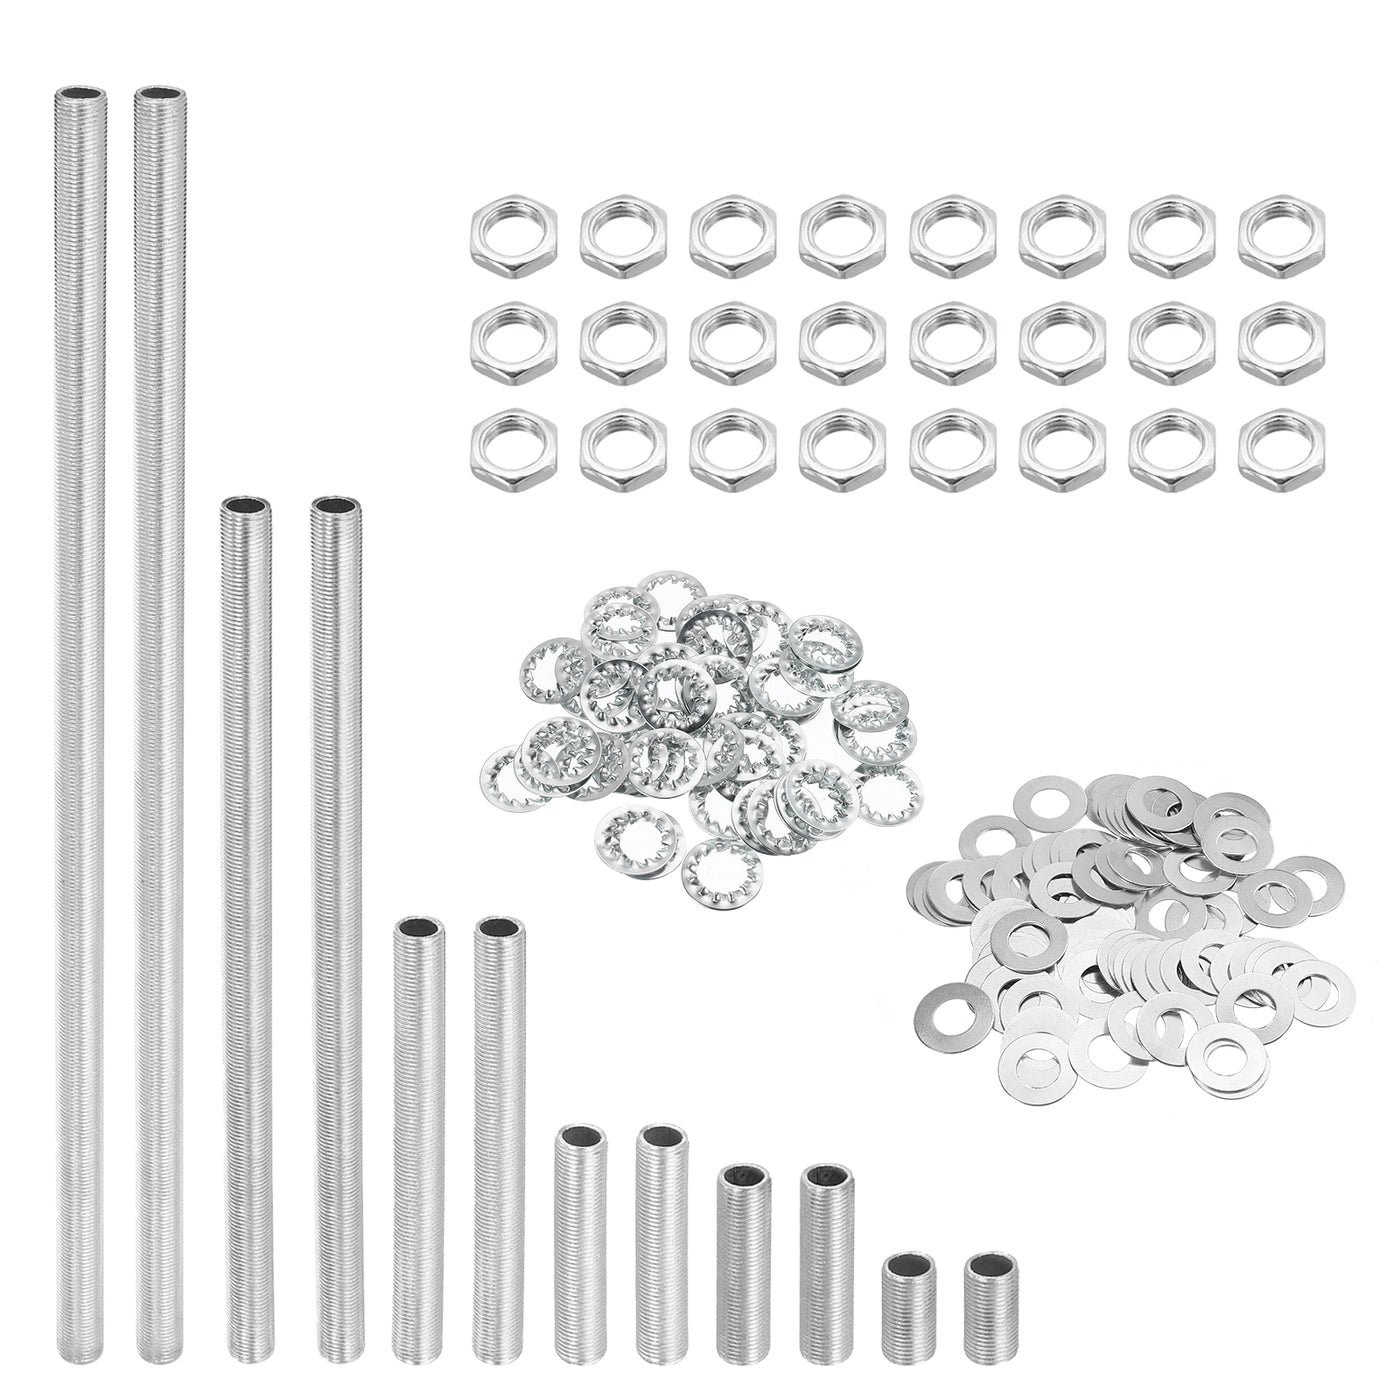 Harfington Lamp Pipe Kit with Lock Nuts Washers 1/8IP Thread Fasteners Assortment for Chandelier Ceiling Light Repair Assembly DIY Hardware, Pack of 84